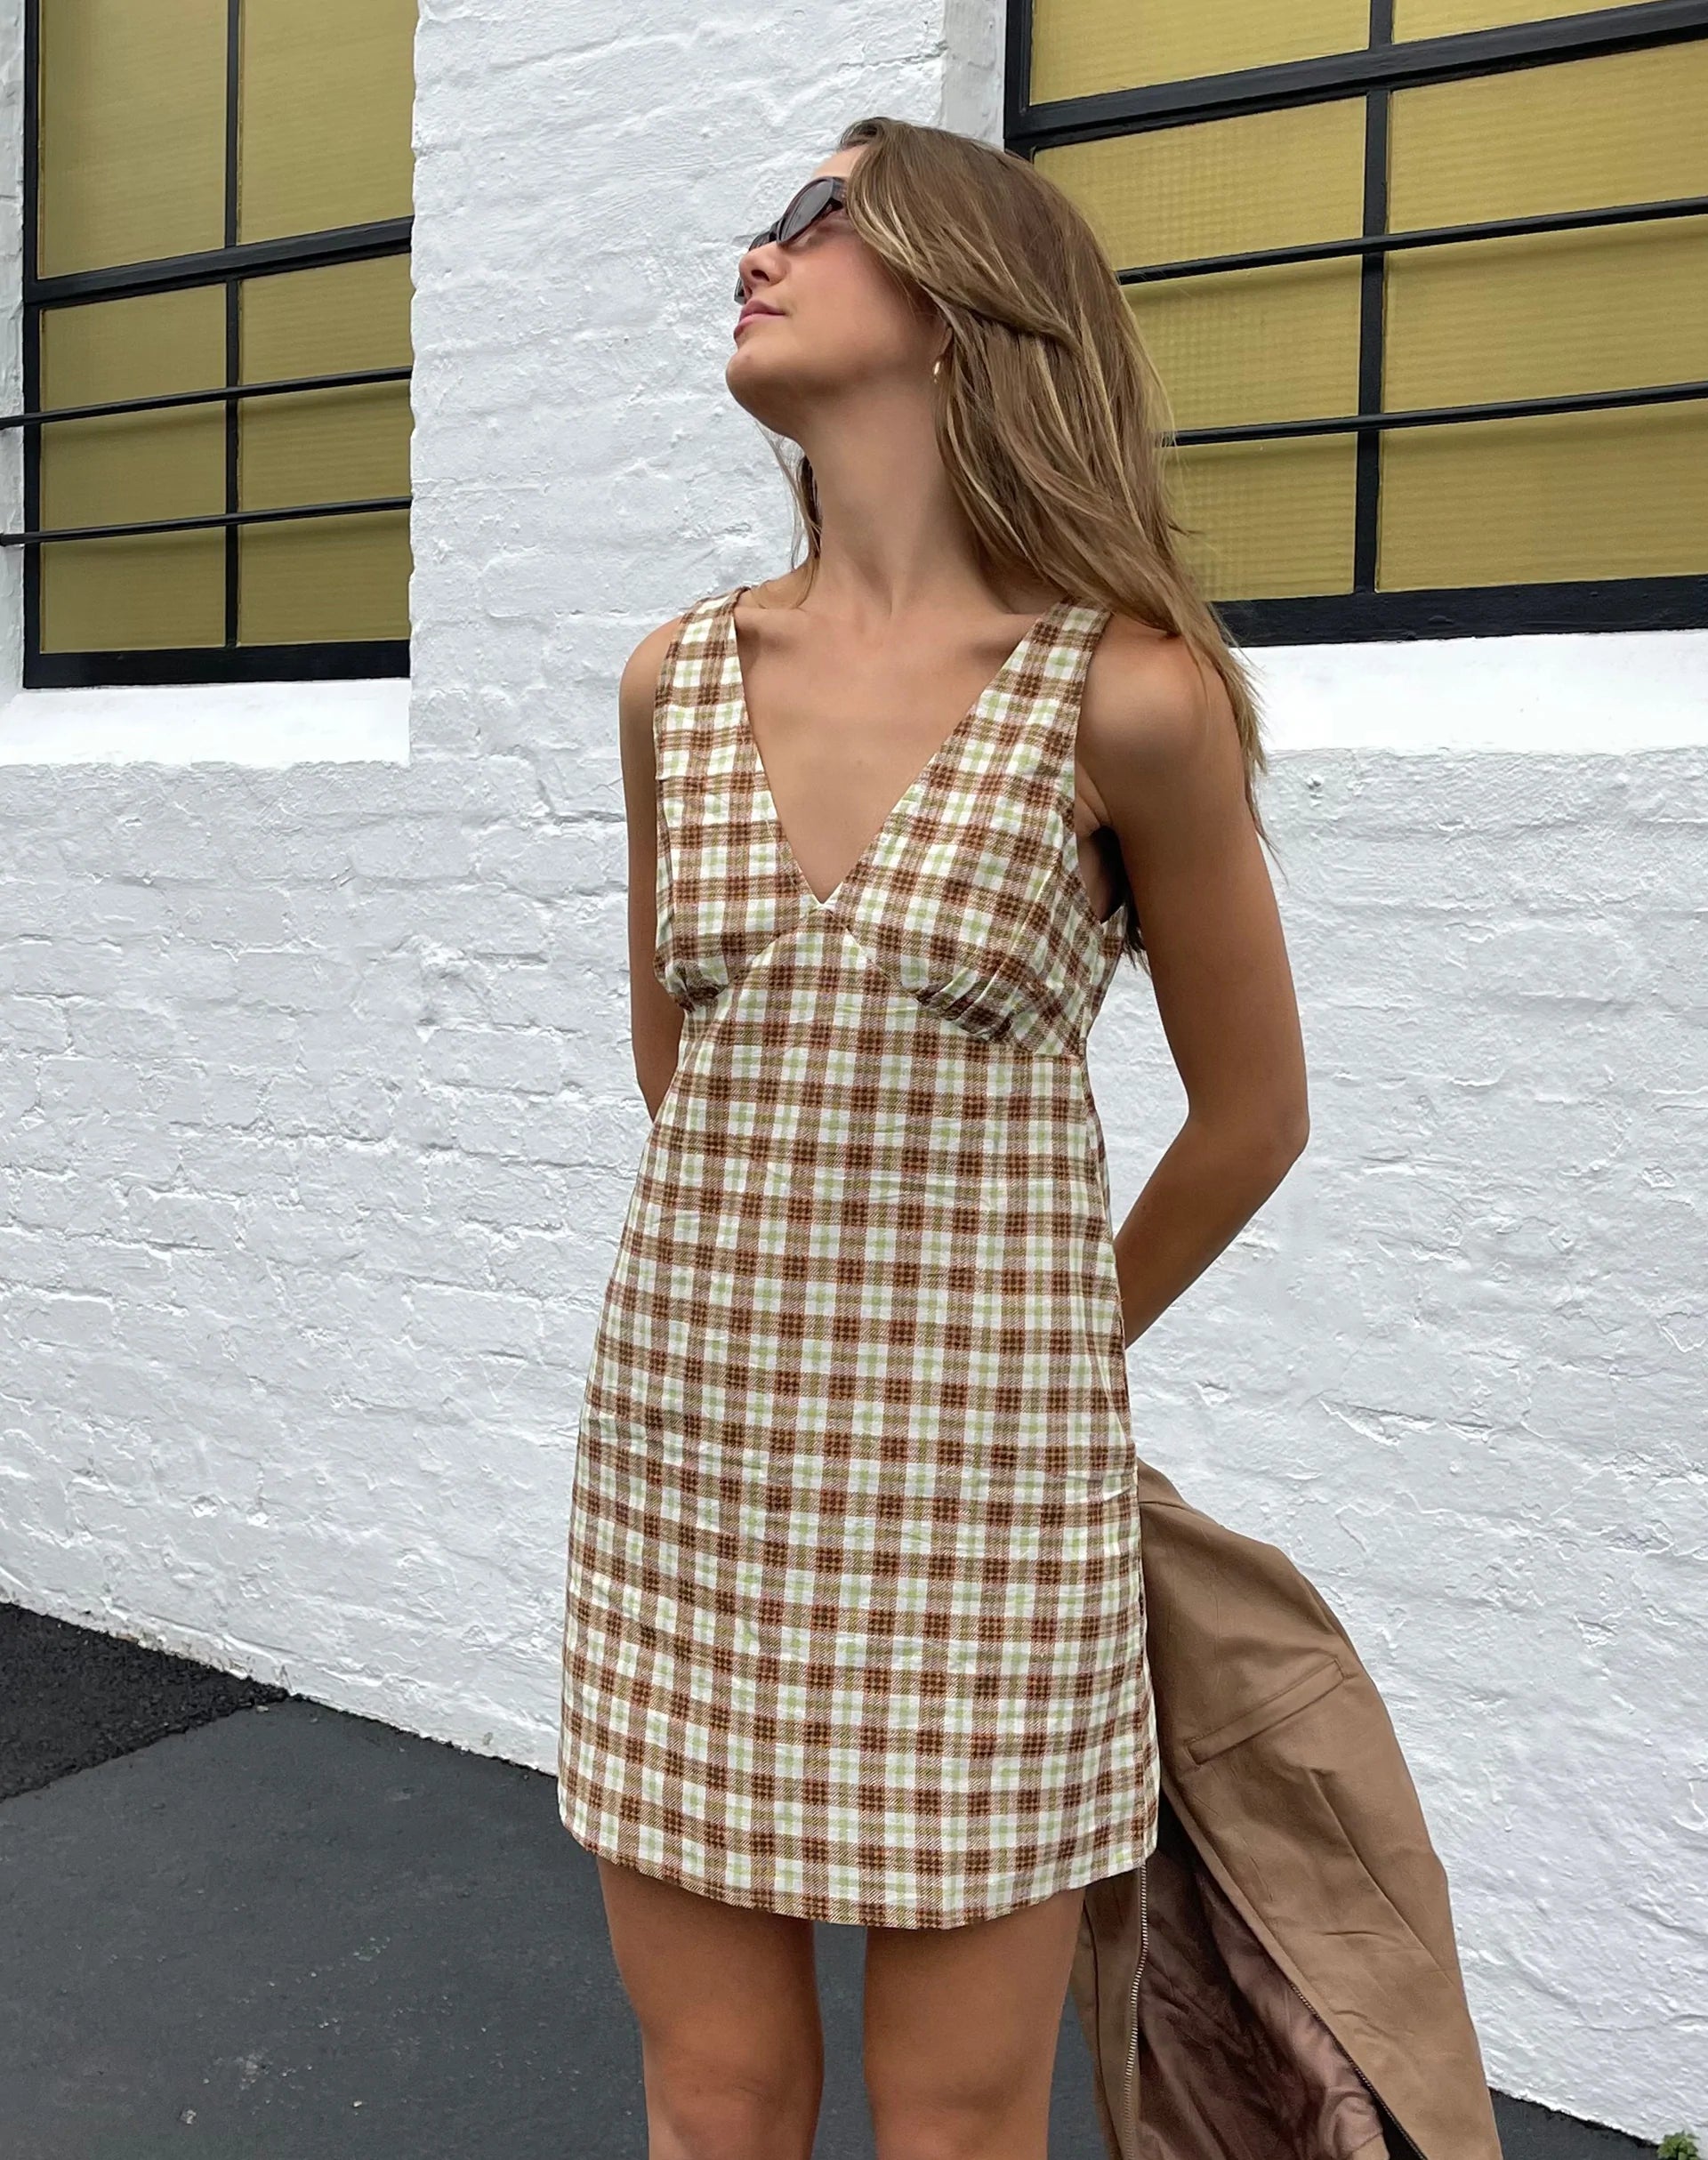 image of MOTEL X JACQUIE Eluned Day Dress in Yellow and Brown Check